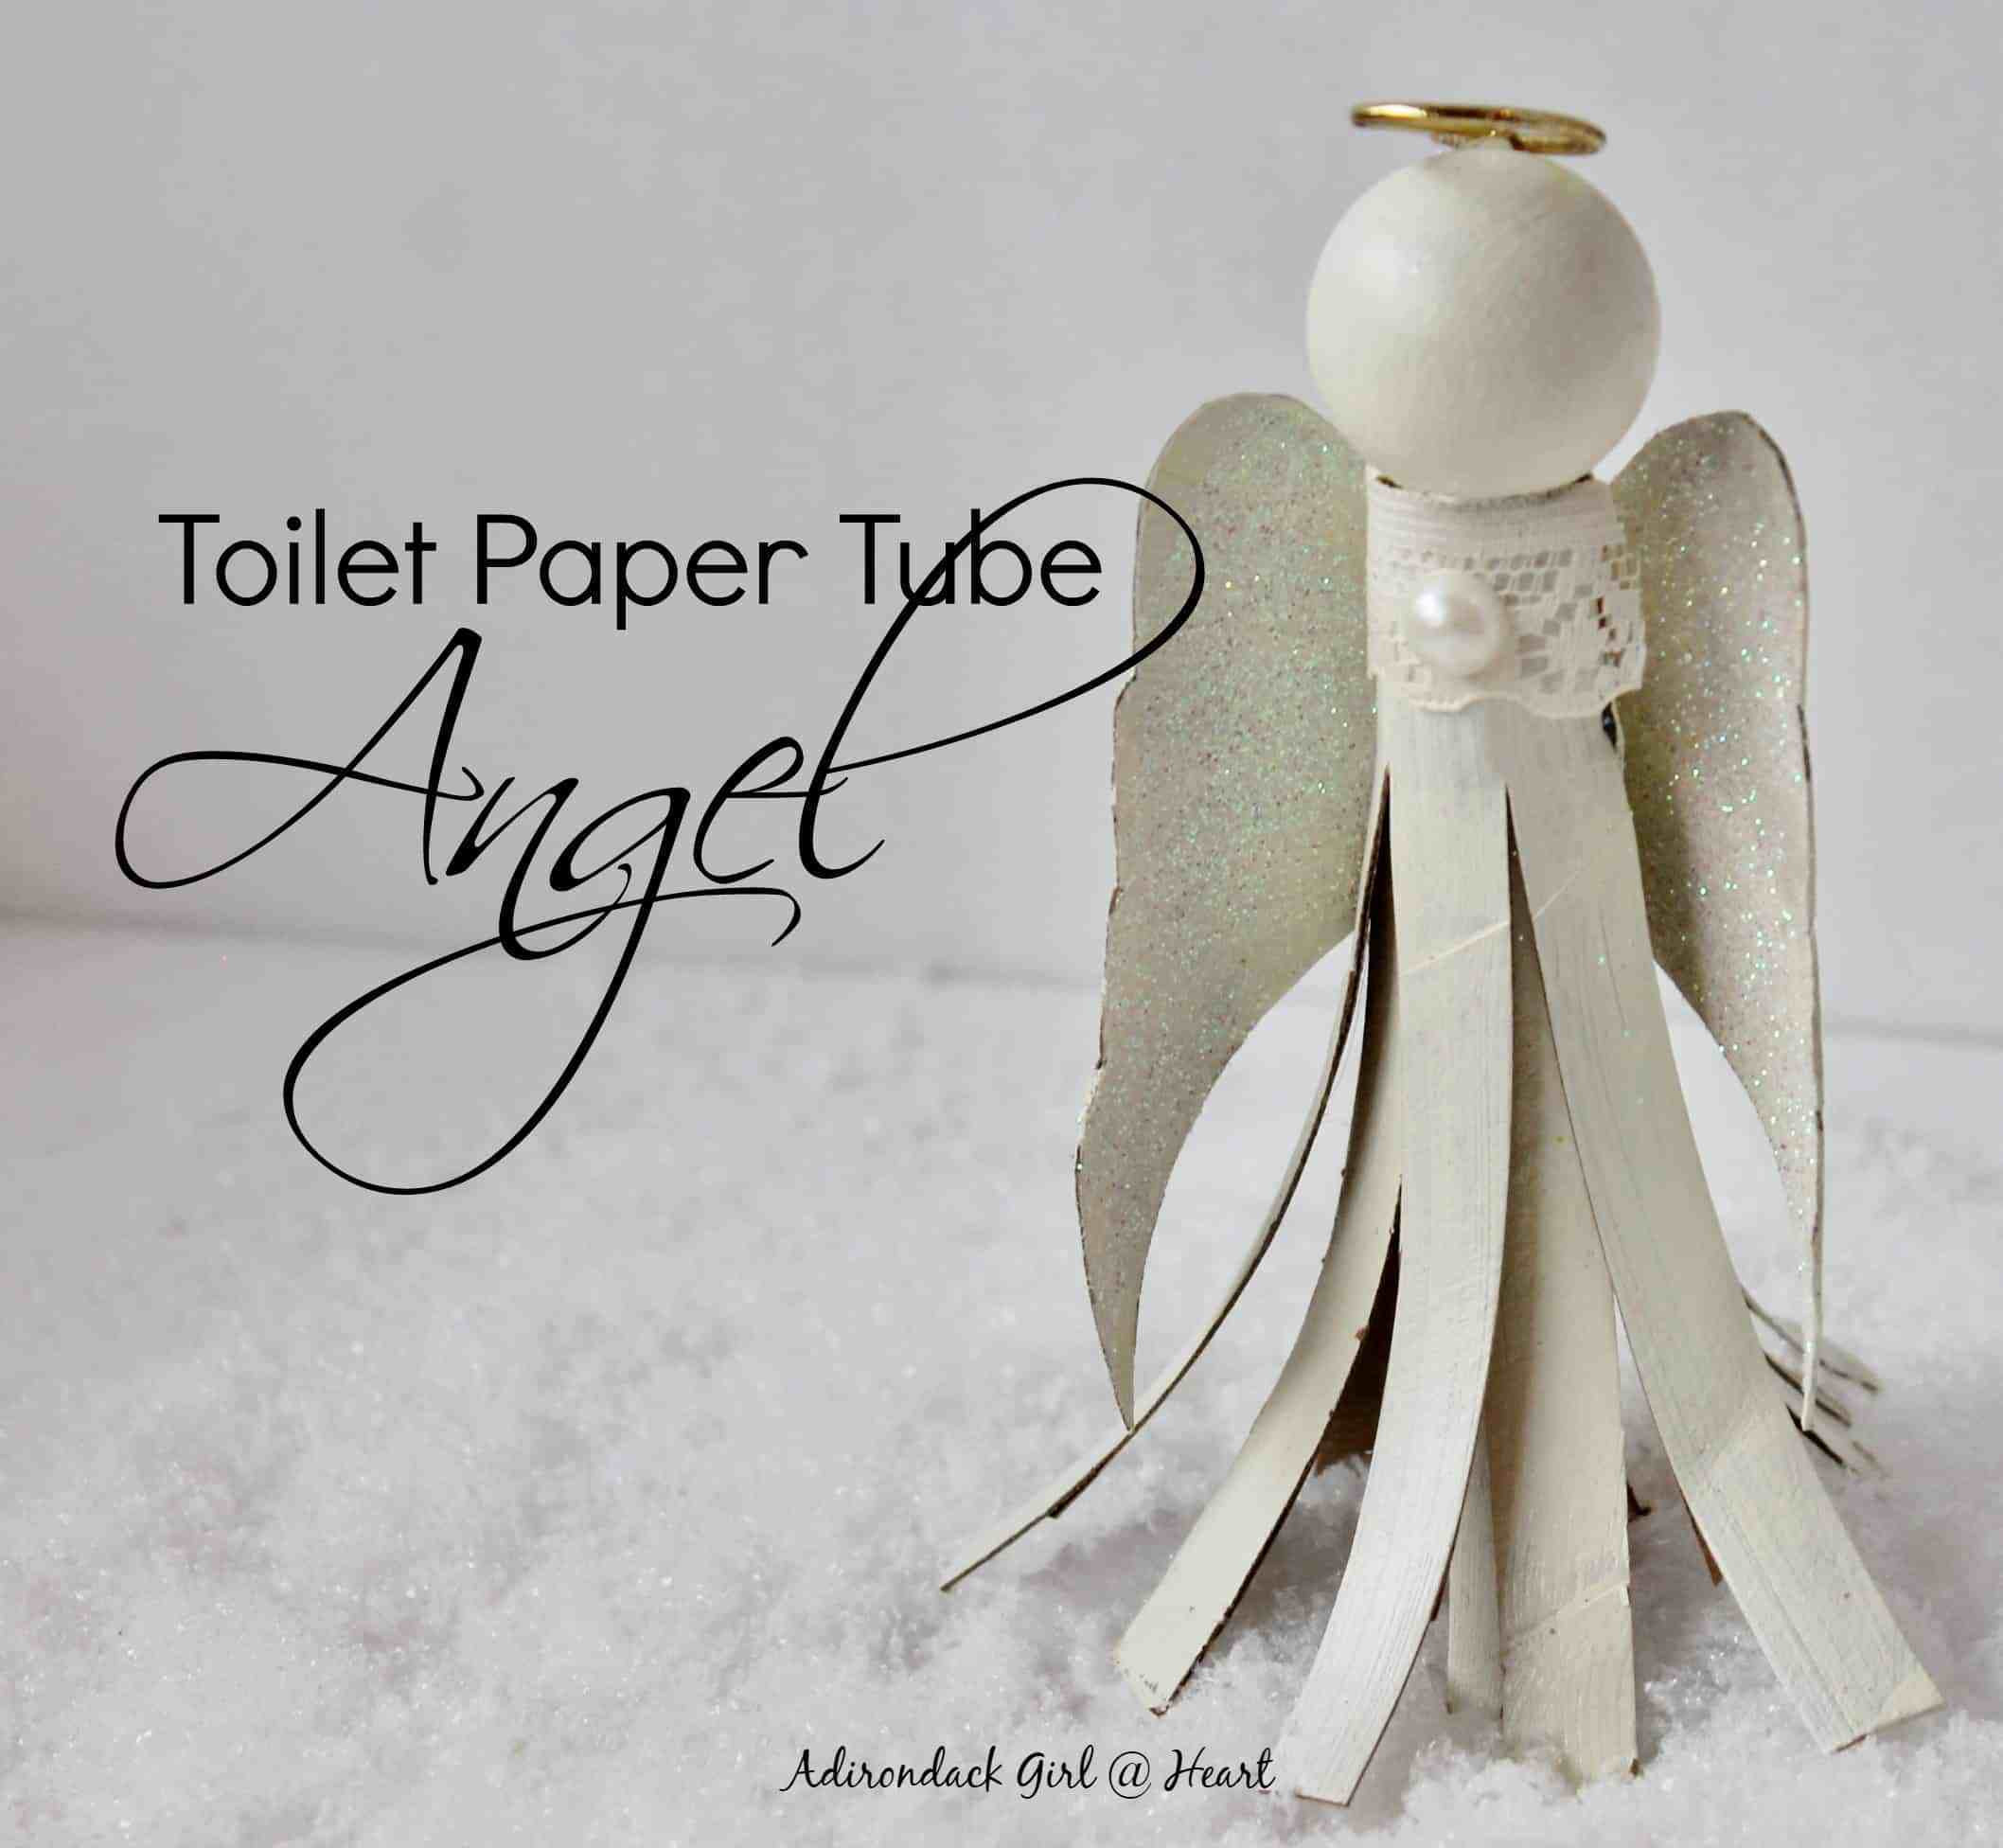 Toilet Paper Tube Christmas Crafts
 9 Last Minute Simple & Thrifty Christmas Ornaments